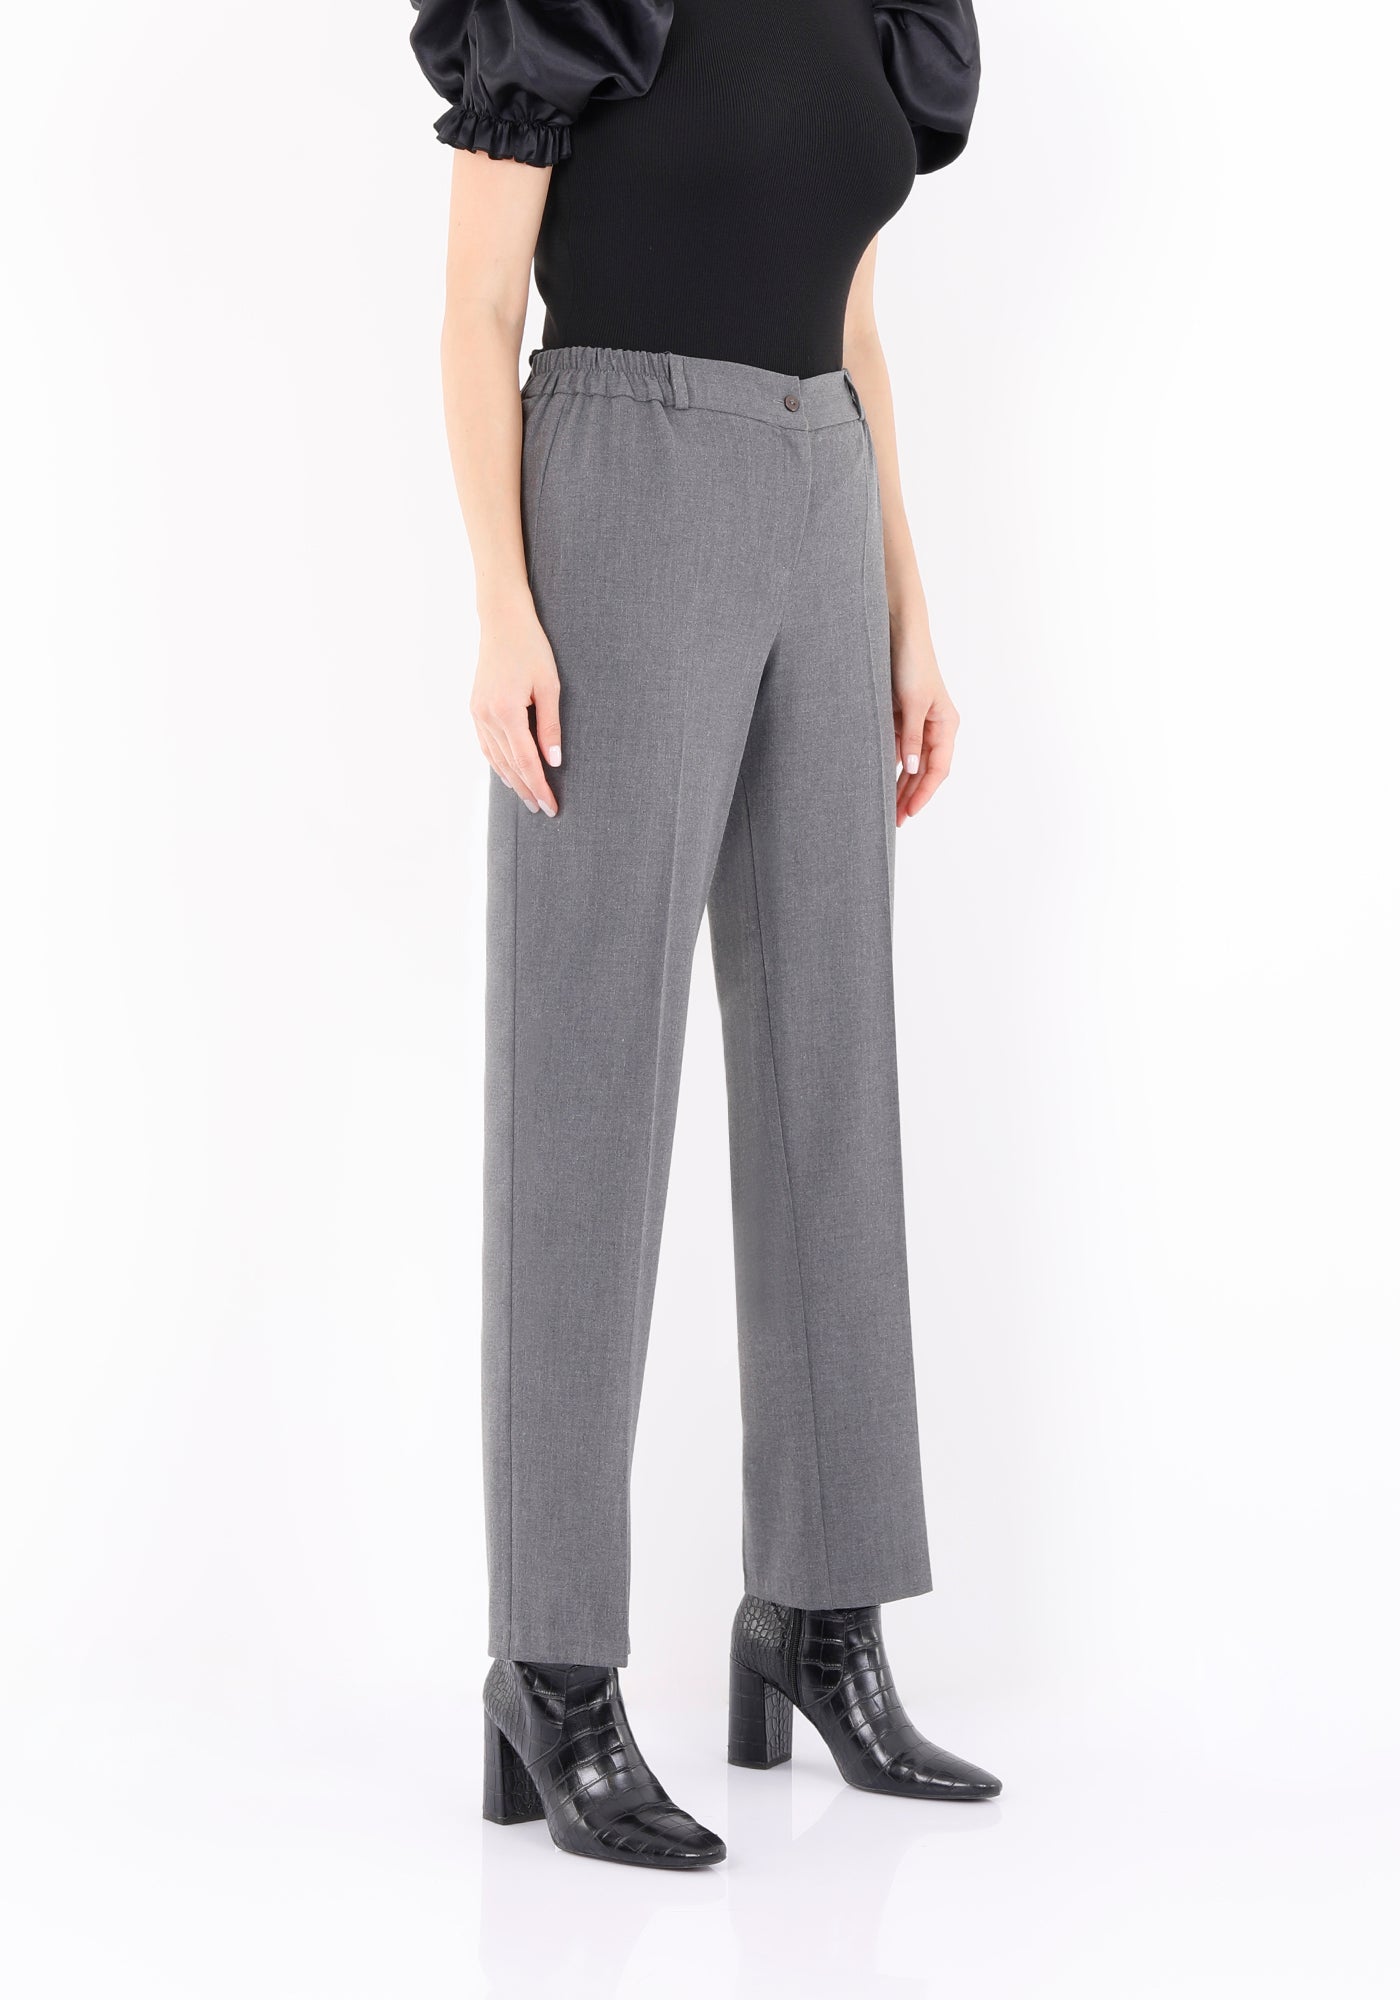 Straight Grey Pants for Women with Elastic Waistband and Zipper Combined G-Line